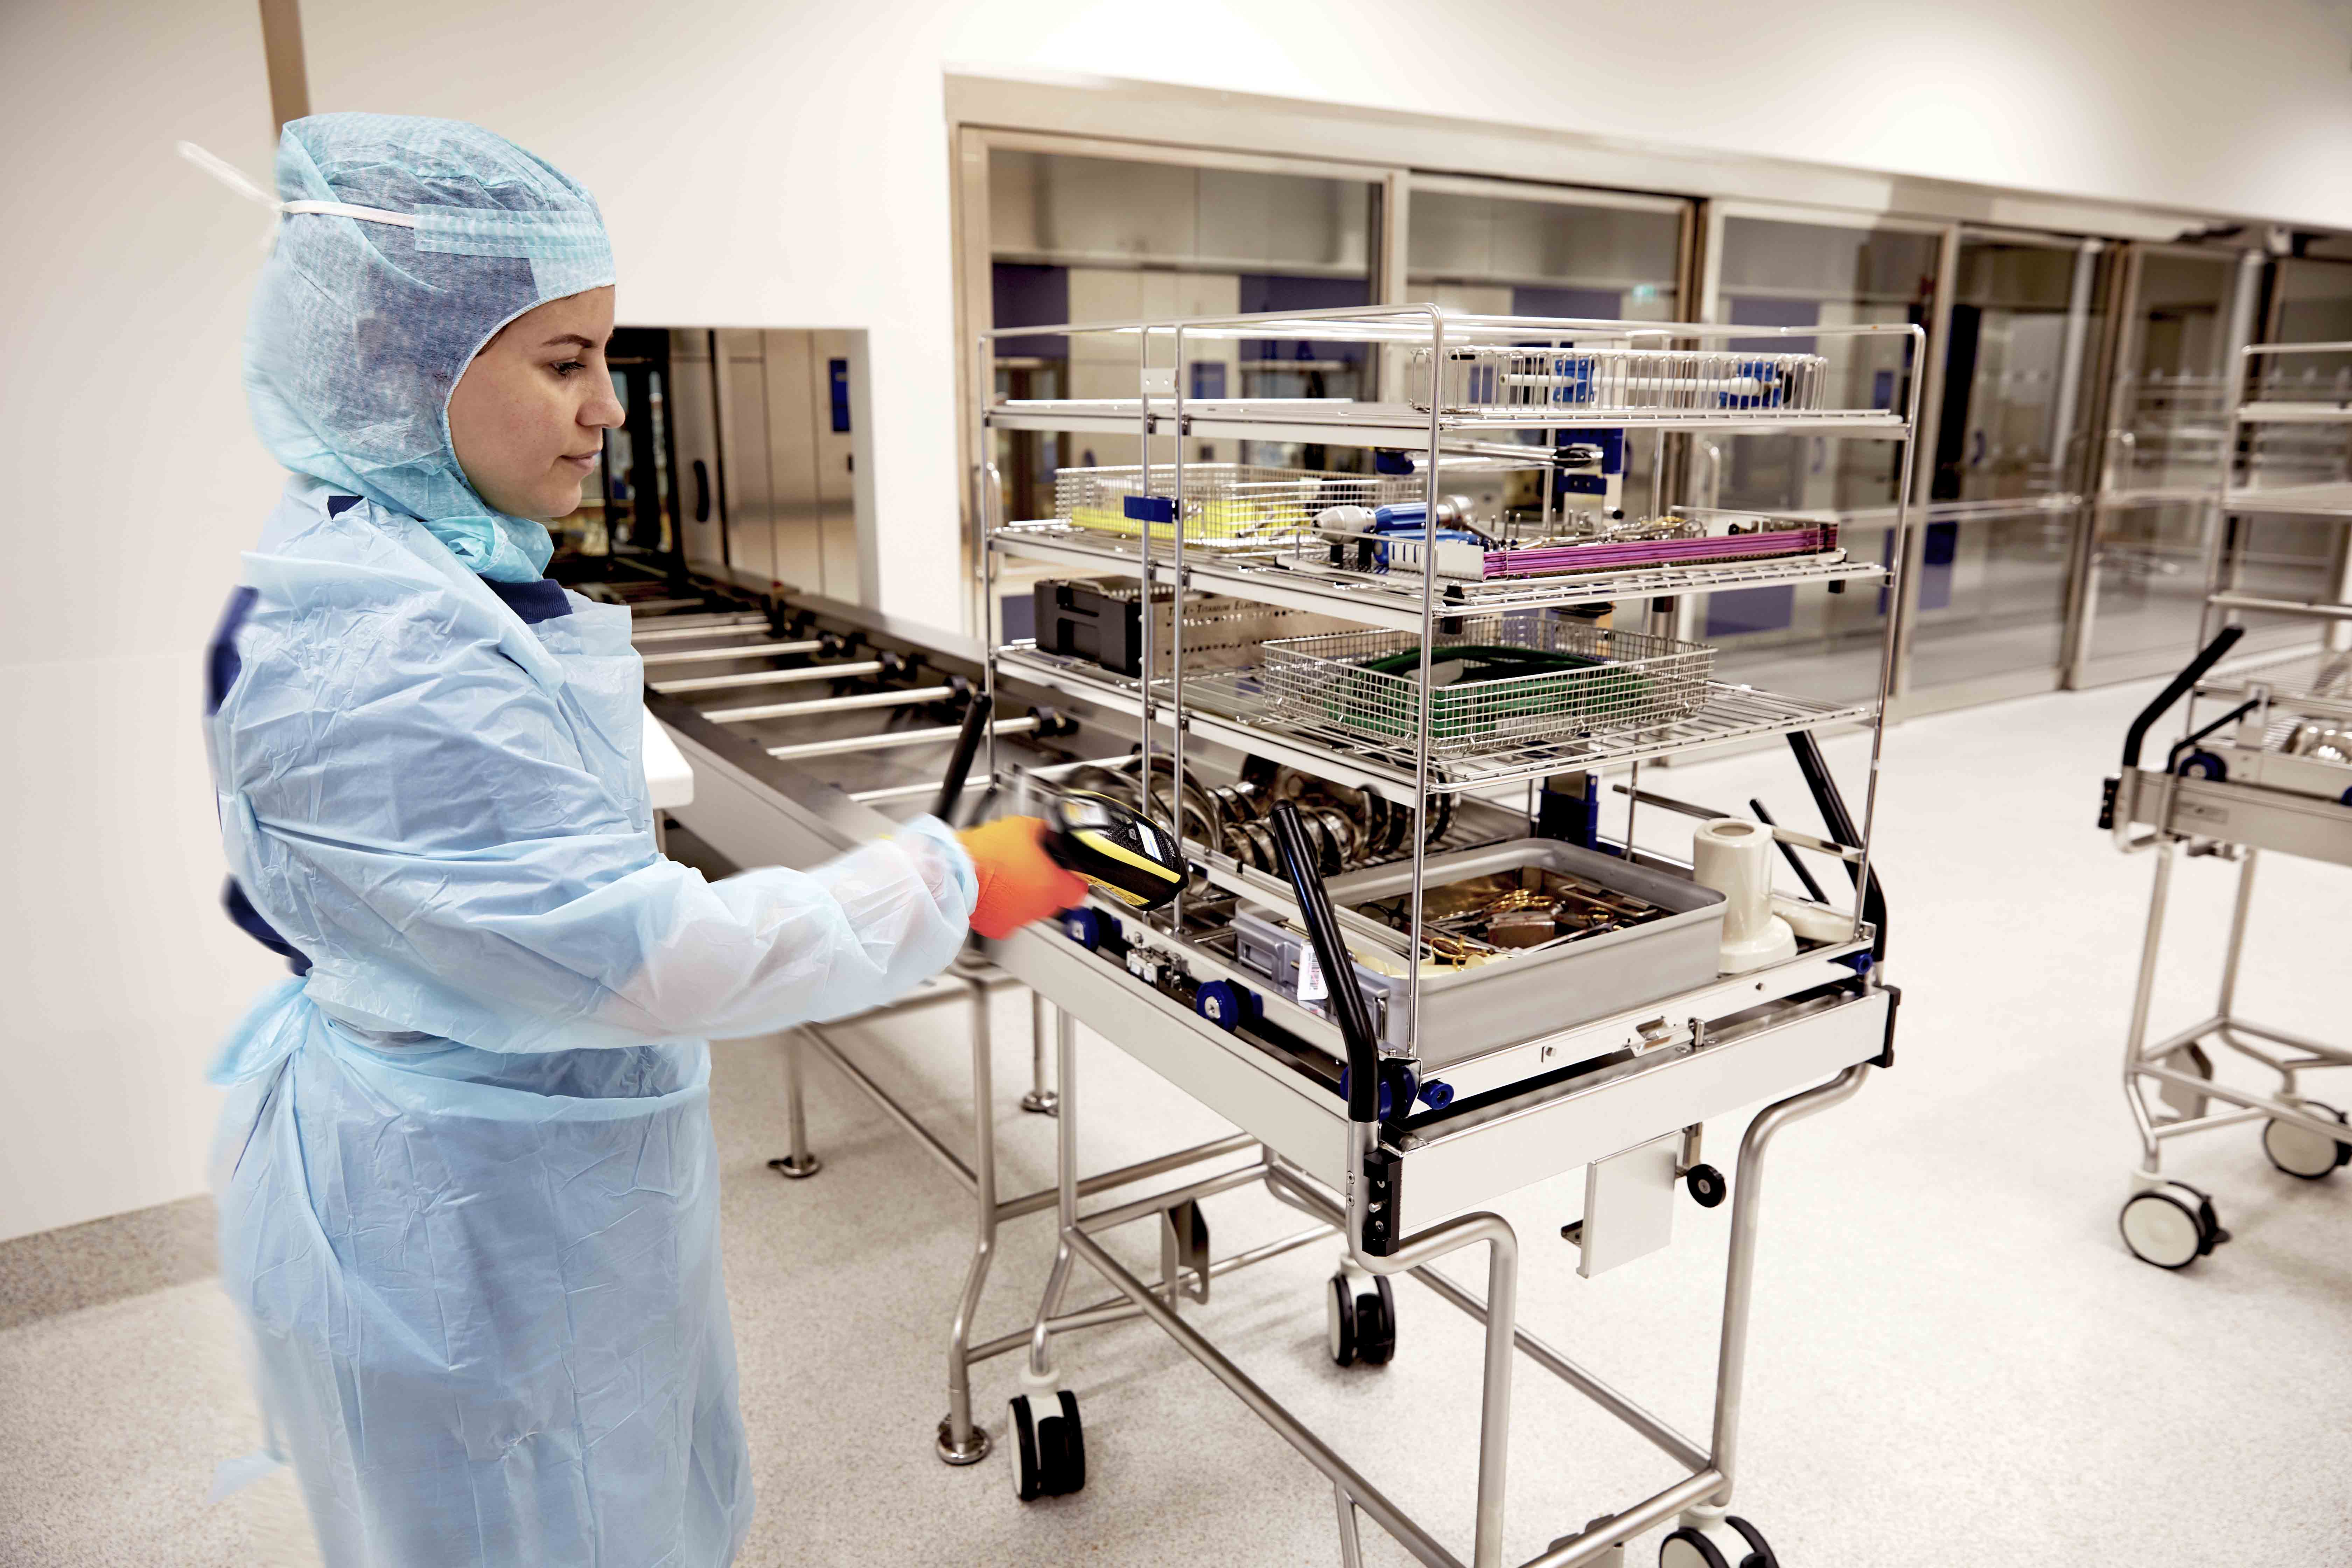 CSSDs technicians fast-tracking trays and instruments to ensure on-time delivery for surgeries